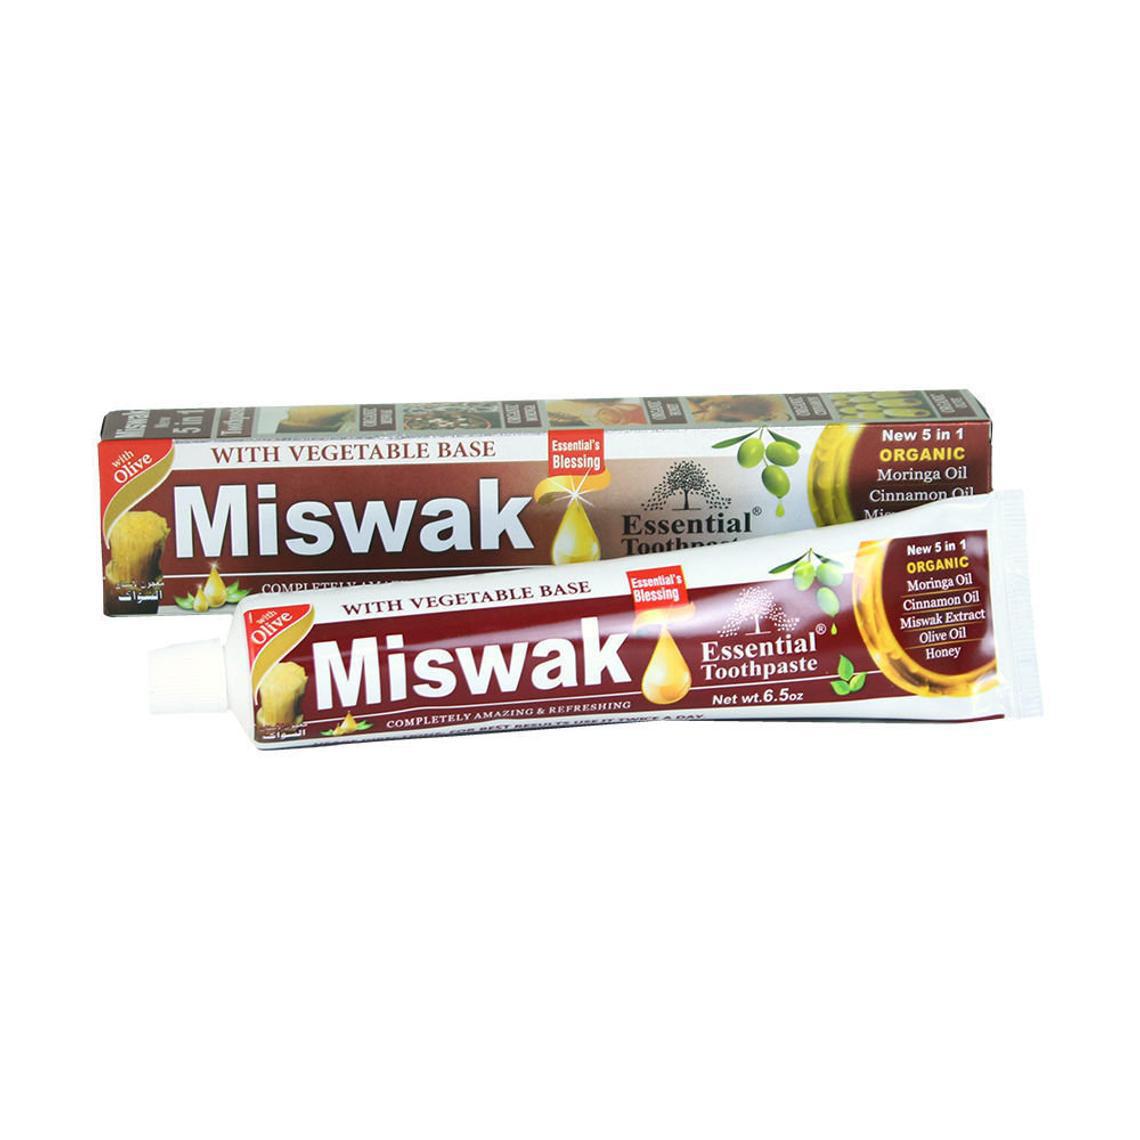 Essential's Blessing Miswak 5 in 1 Organic Toothpaste 6.5oz